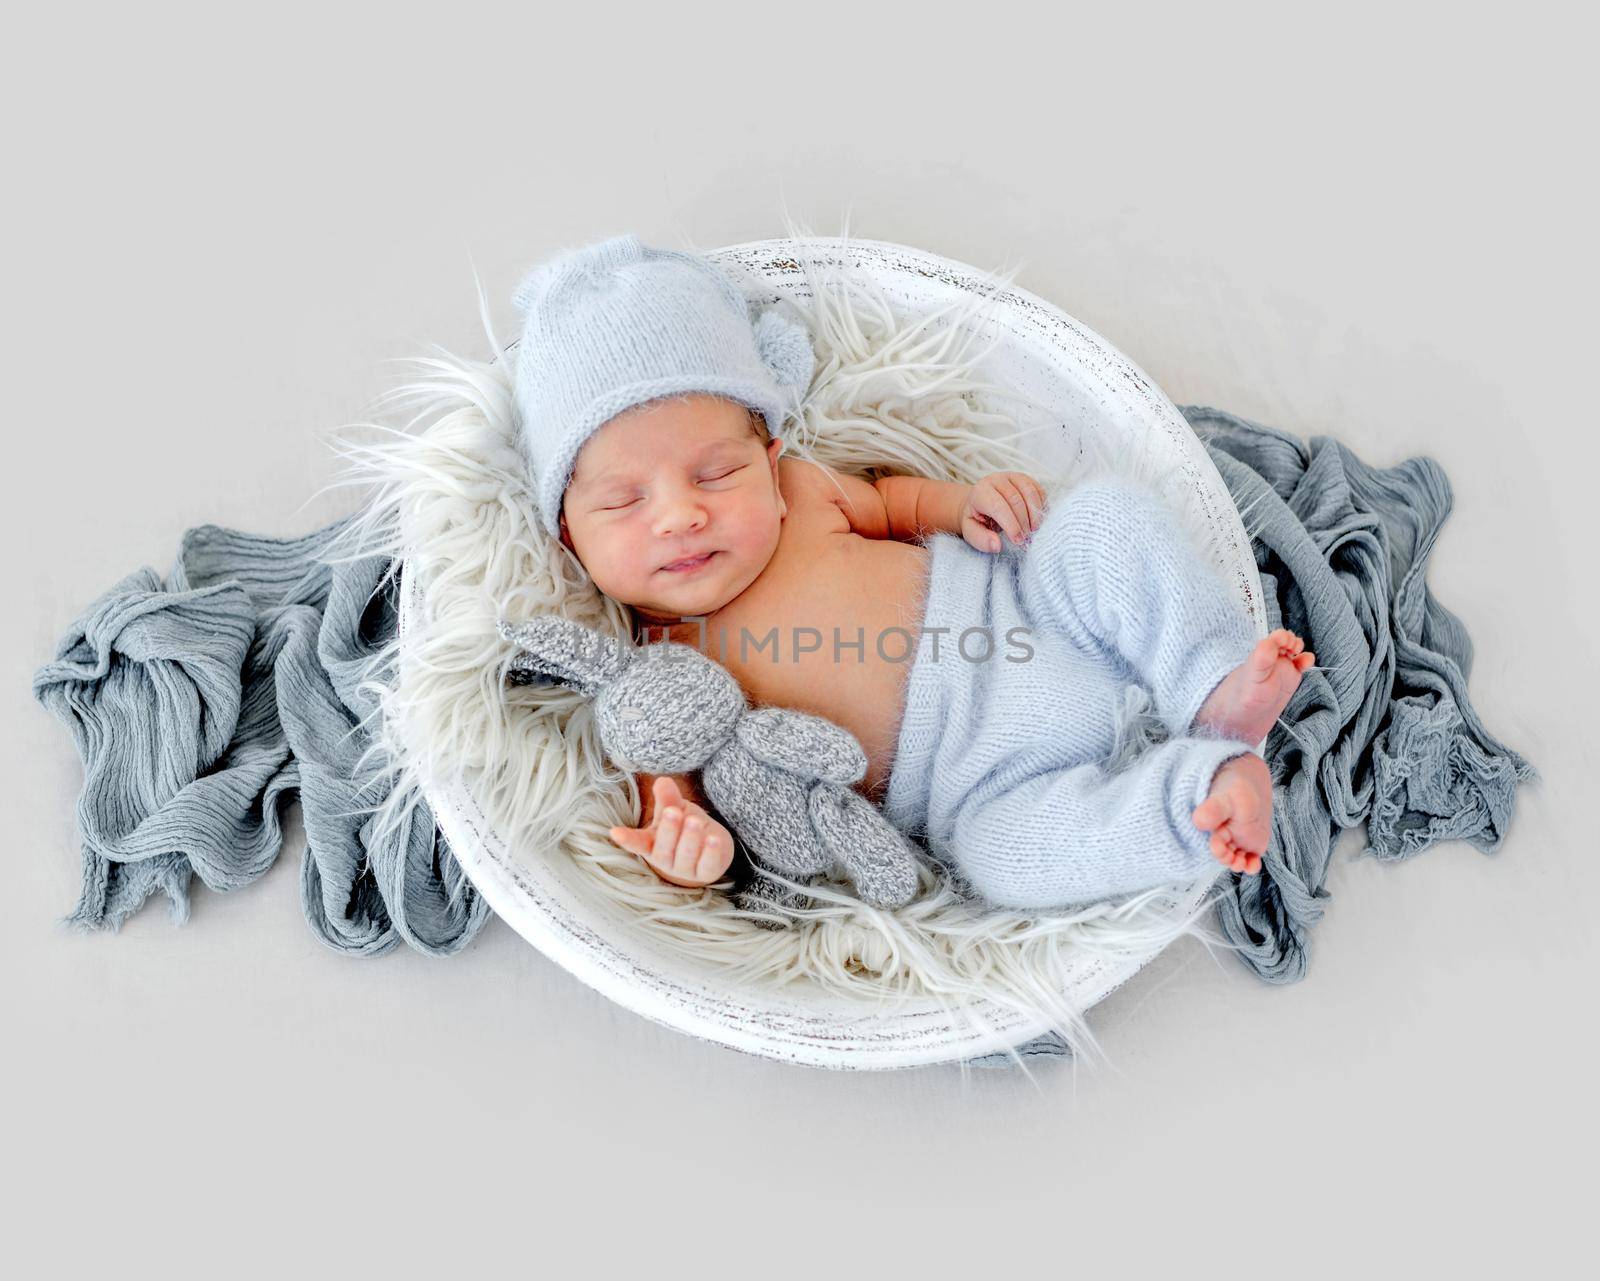 Adorable newborn baby boy wearing cute knitted hat and pants sleeping in wooden basin on fur and holding handmade bunny toy. Infant child napping